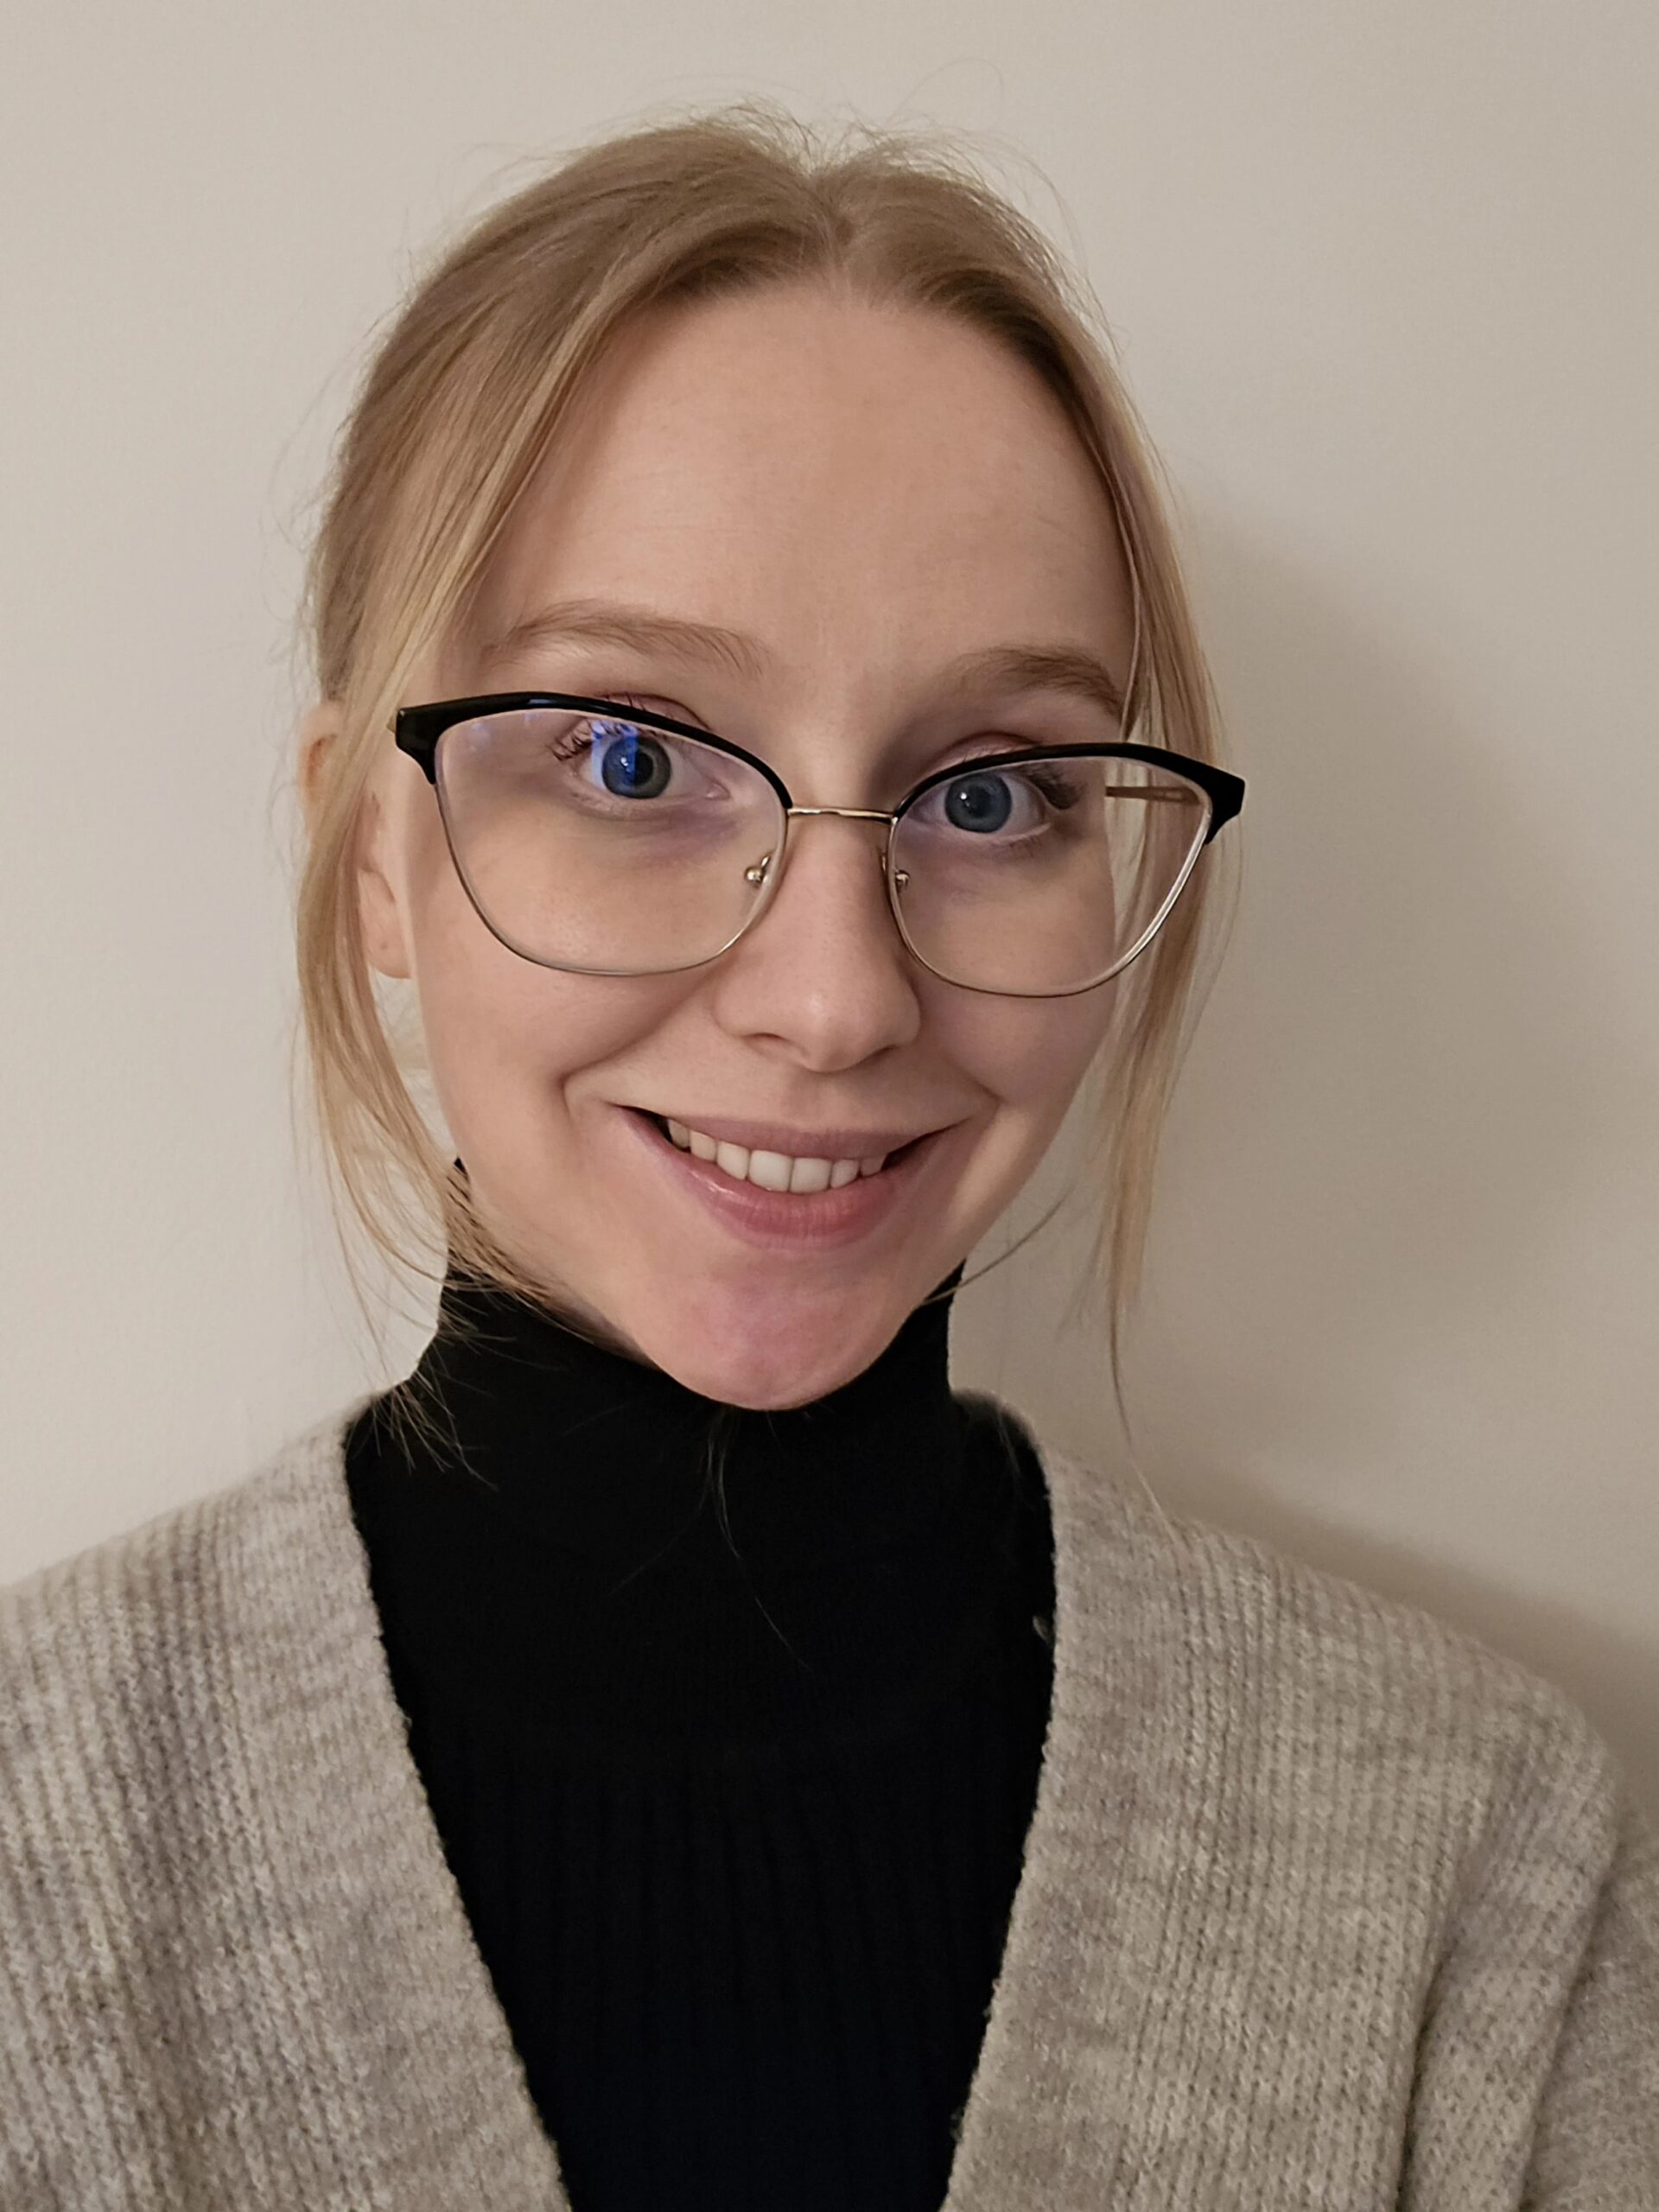 Picture of smiling young woman with glasses and blonde hair. Wearing a black turtle neck top and Taupe cardigan.